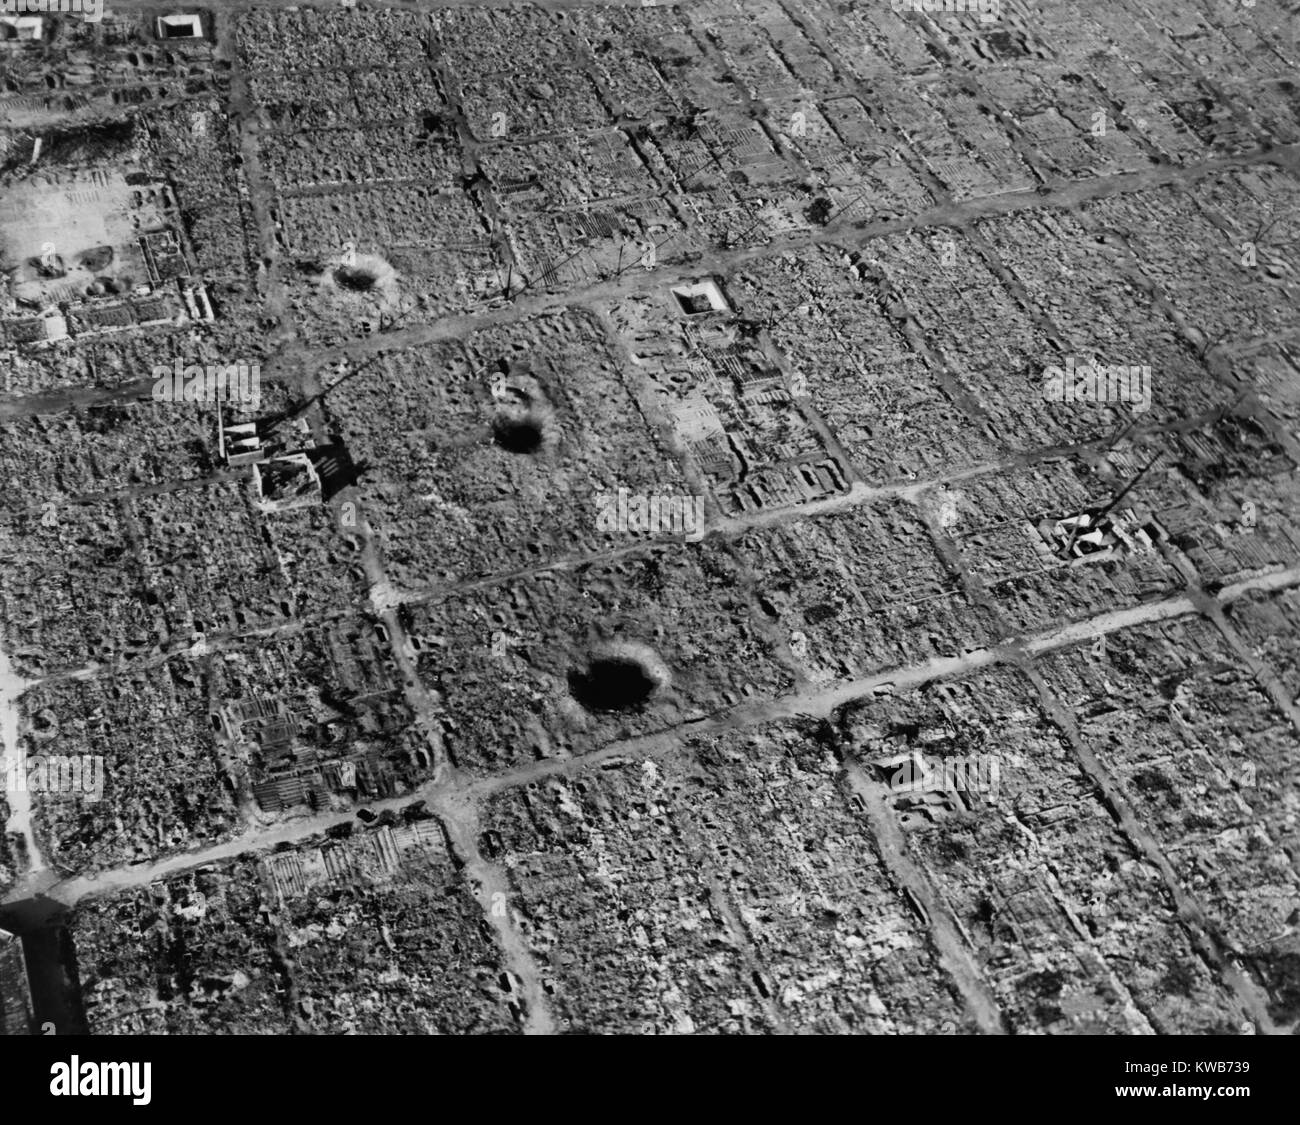 Aerial view of Osaka, Japan, after firebombing by U.S. incendiary bombs. The city suffered three bombing campaigns by B-29 Superfortresses from March to August 1945. The last occurred on Aug. 14, five days after the Atomic bombing of Nagasaki. World War 2. (BSLOC_2014_10_116) Stock Photo